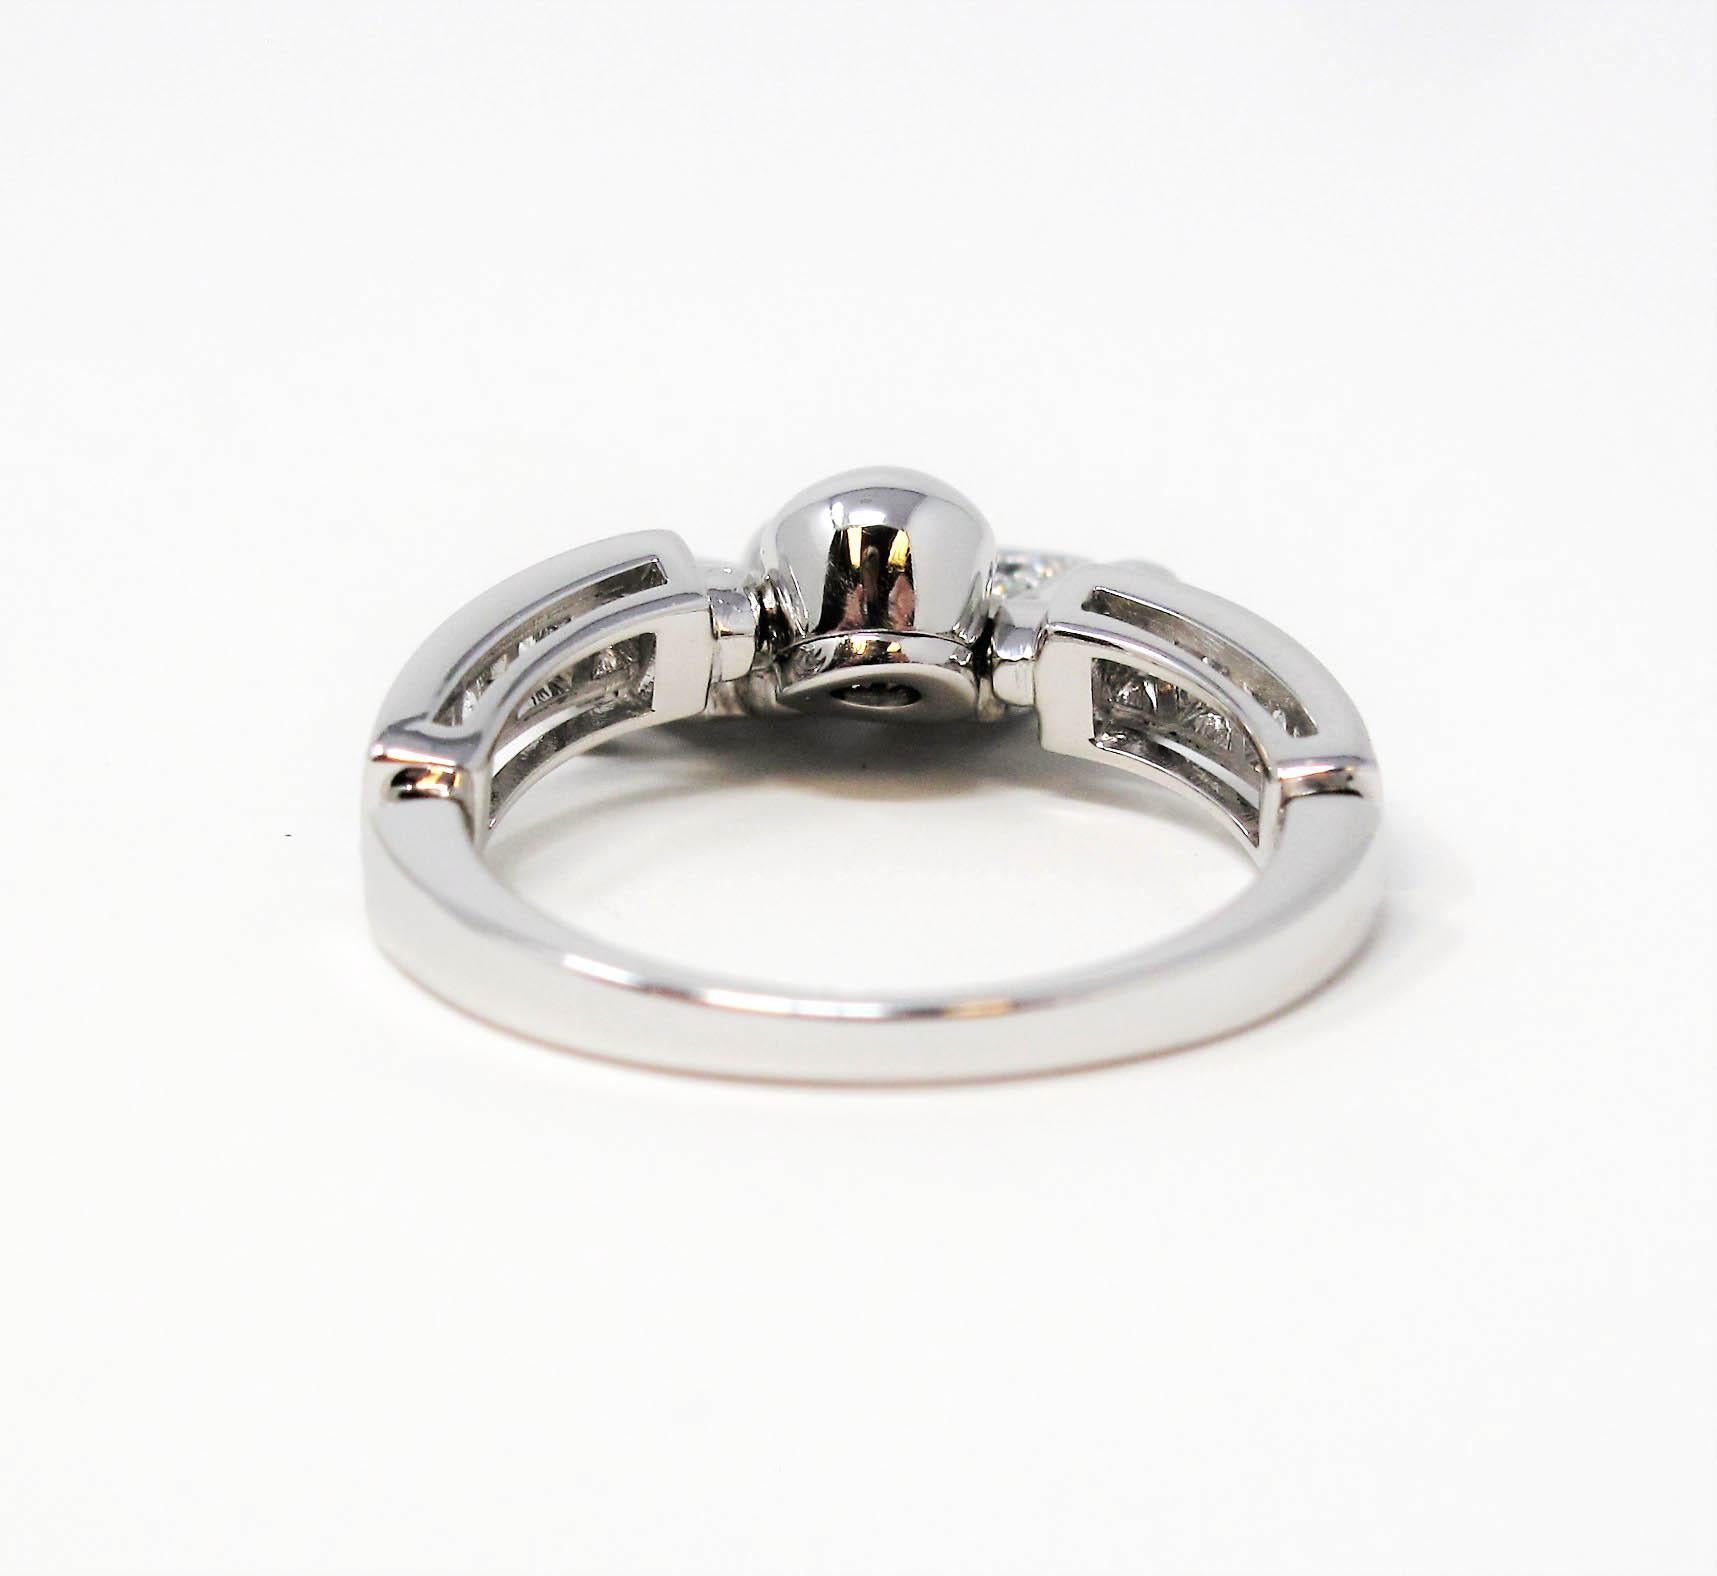 Bvlgari Astrale Fireworks Band Ring in 18 Karat White Gold with Diamonds 6.75 For Sale 1